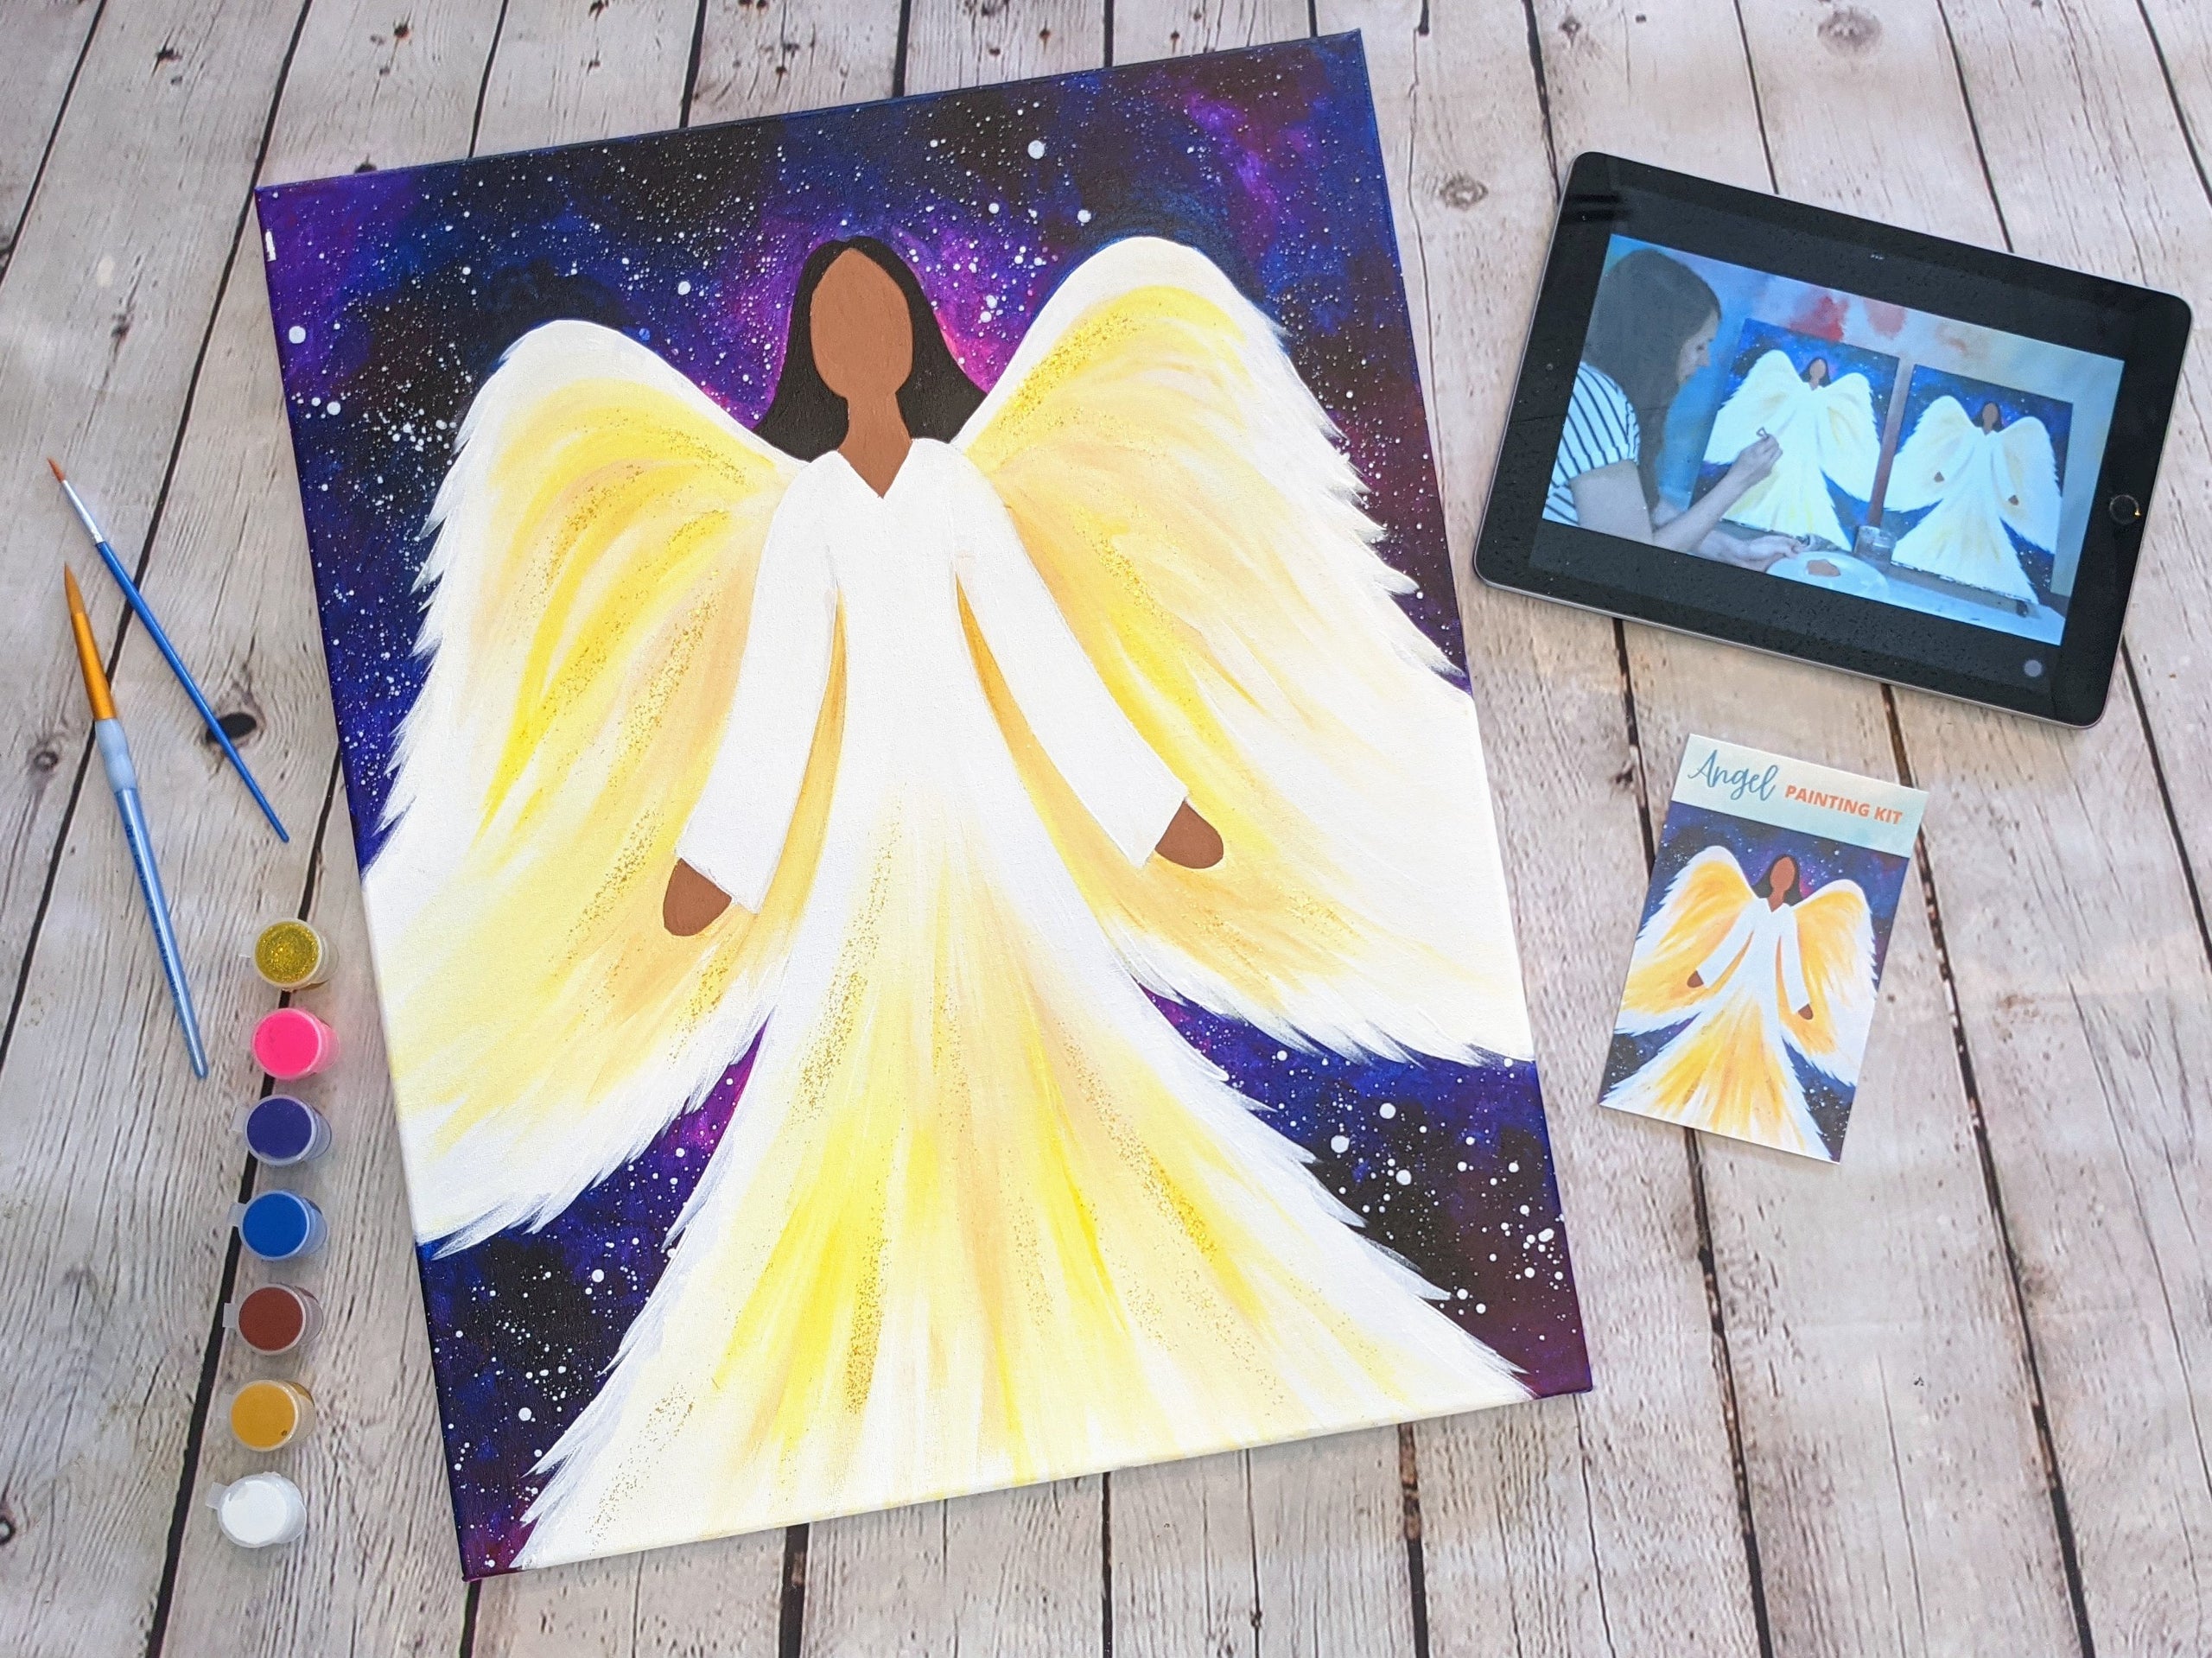 Angel Canvas & Sign Painting